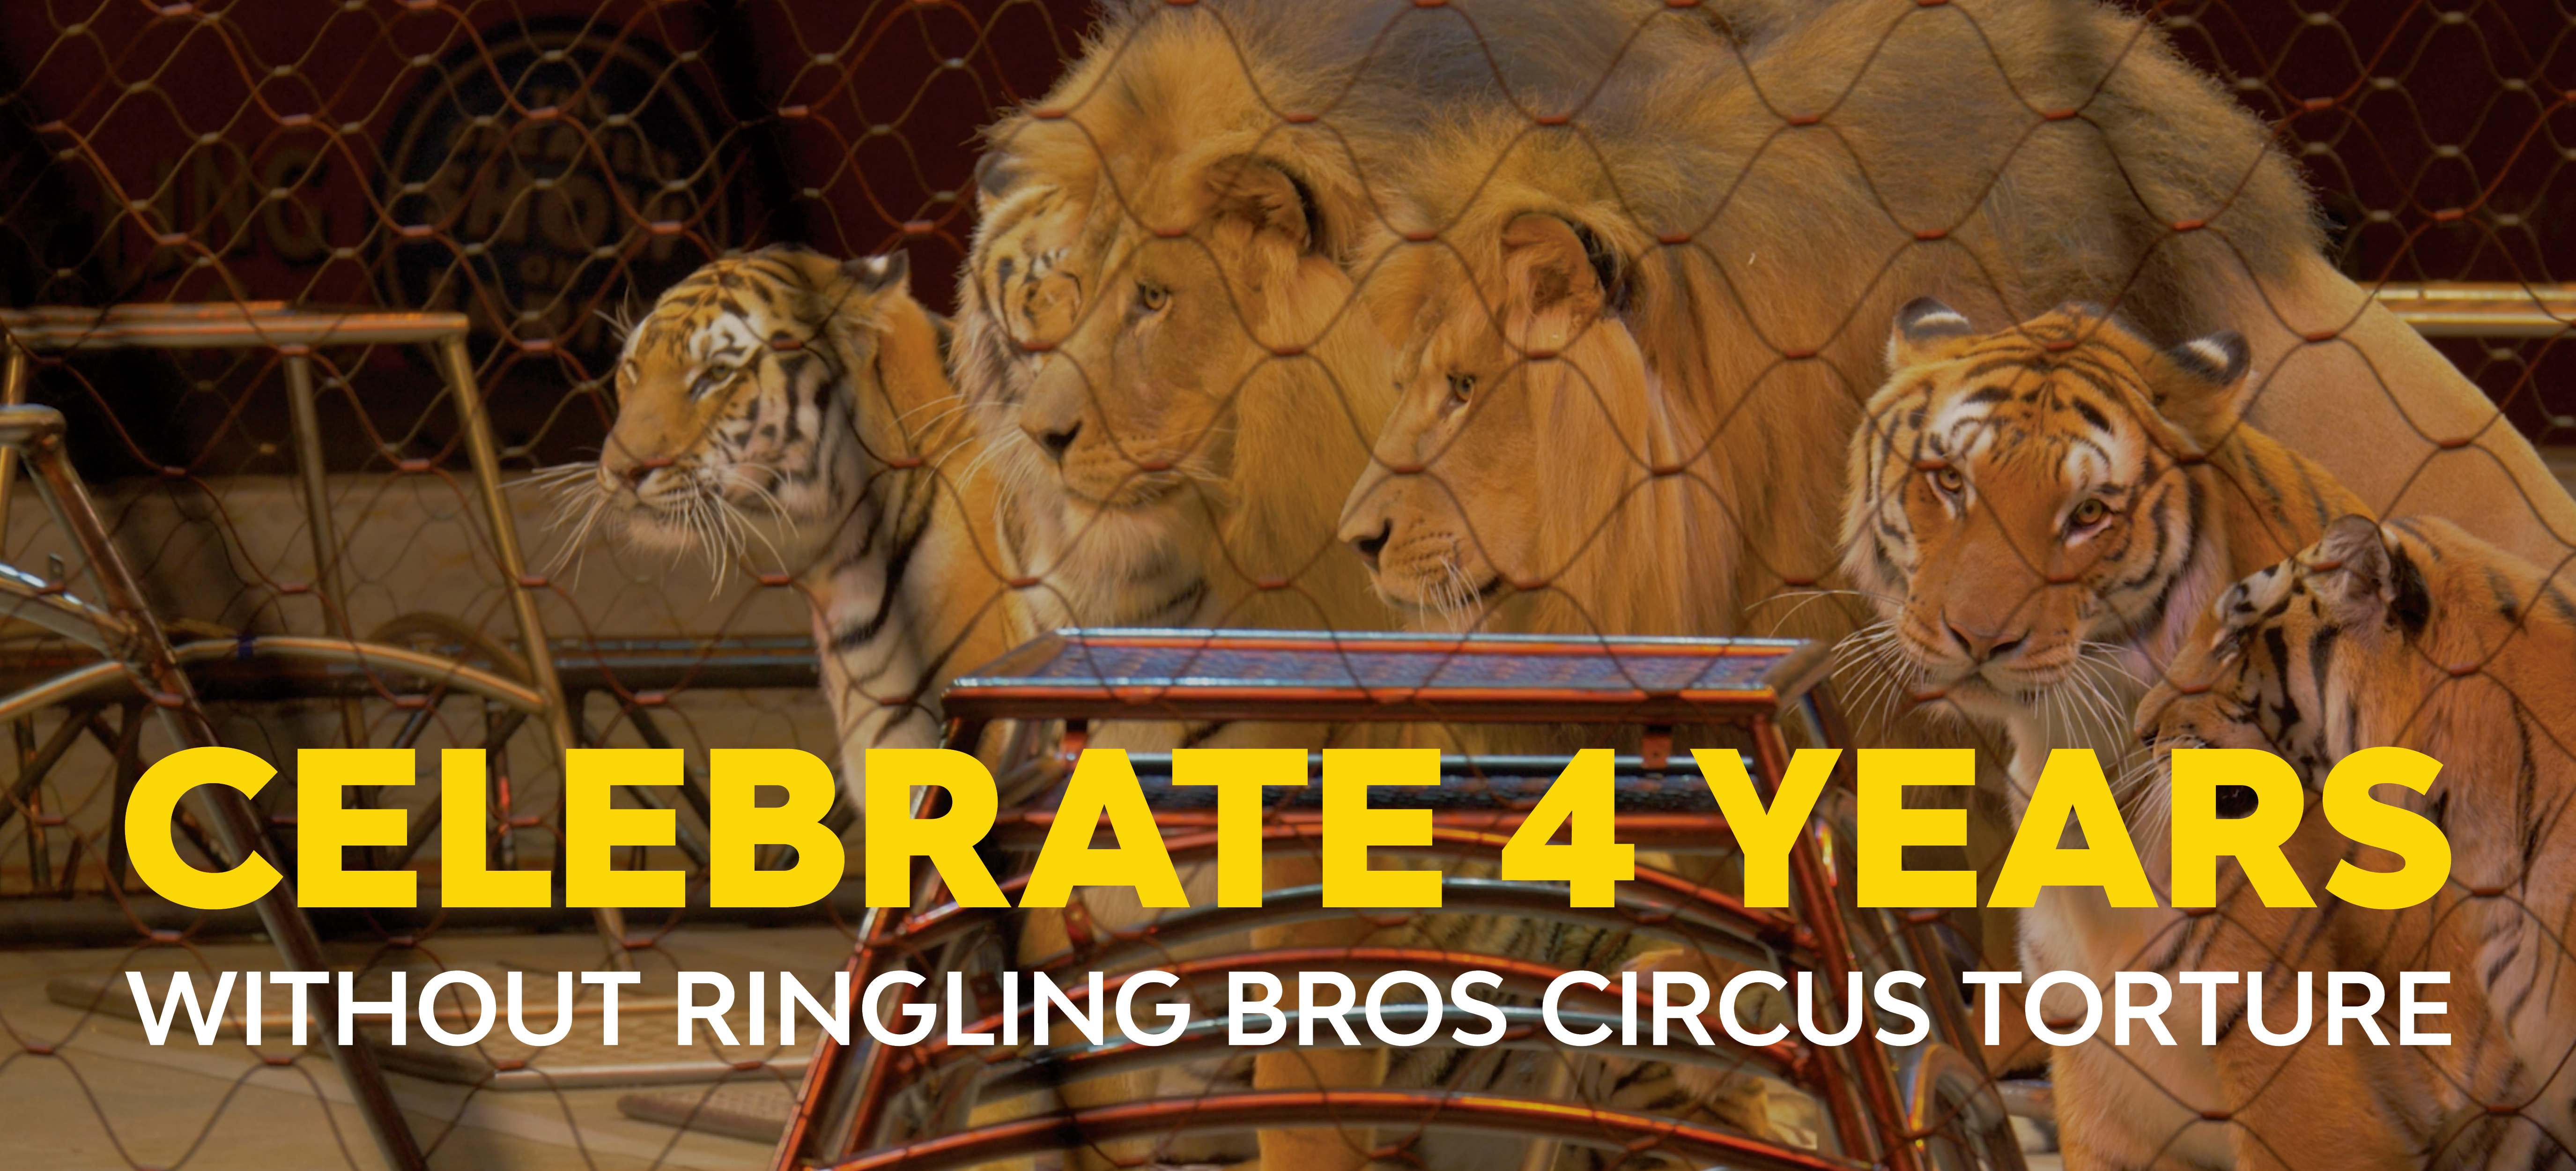 Celebrate 4 years without Ringling Bros circus